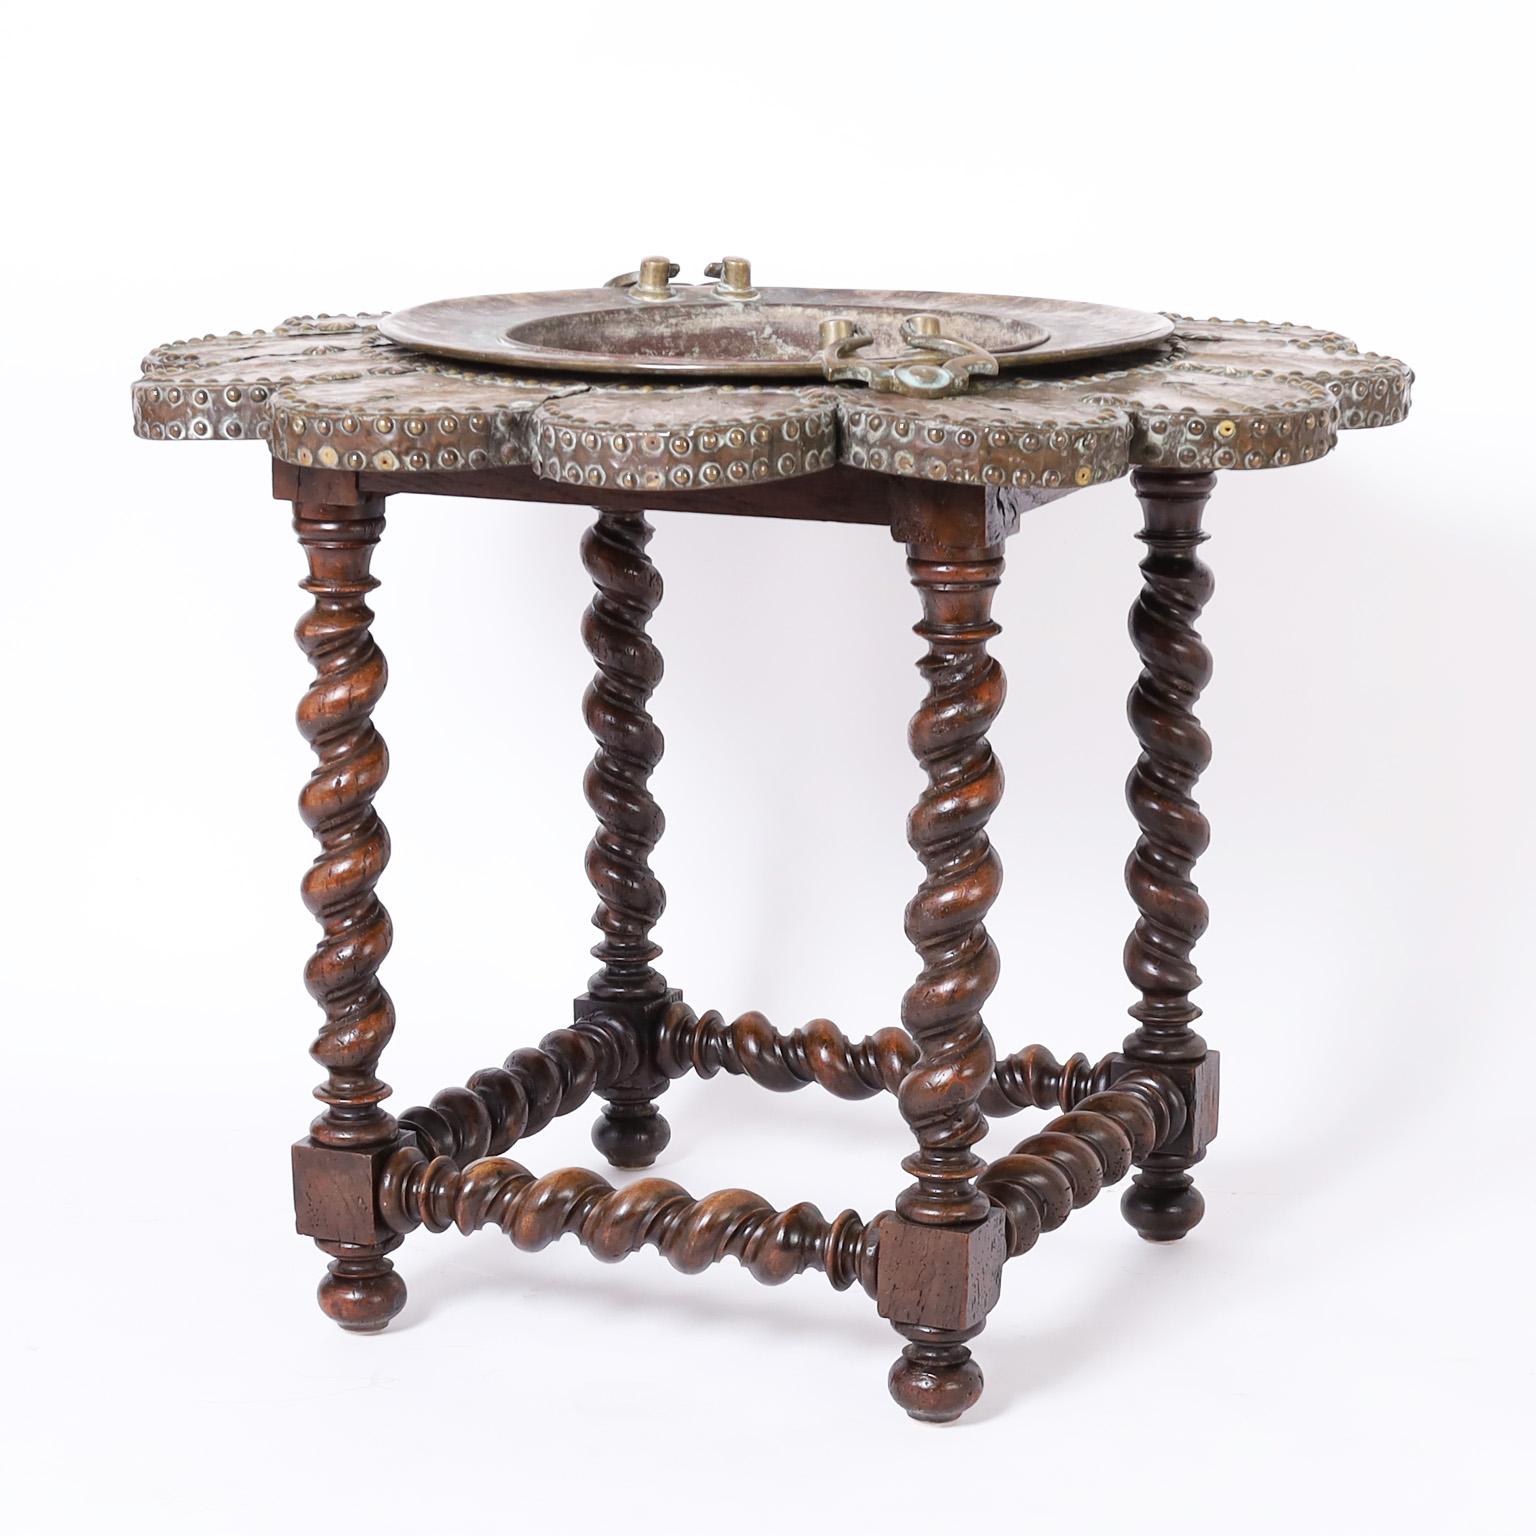 Intriguing 19th century English table with a hand crafted copper brazier surrounded by brass tacked pedals with plenty of wear on a carved and turned barley twist walnut base.